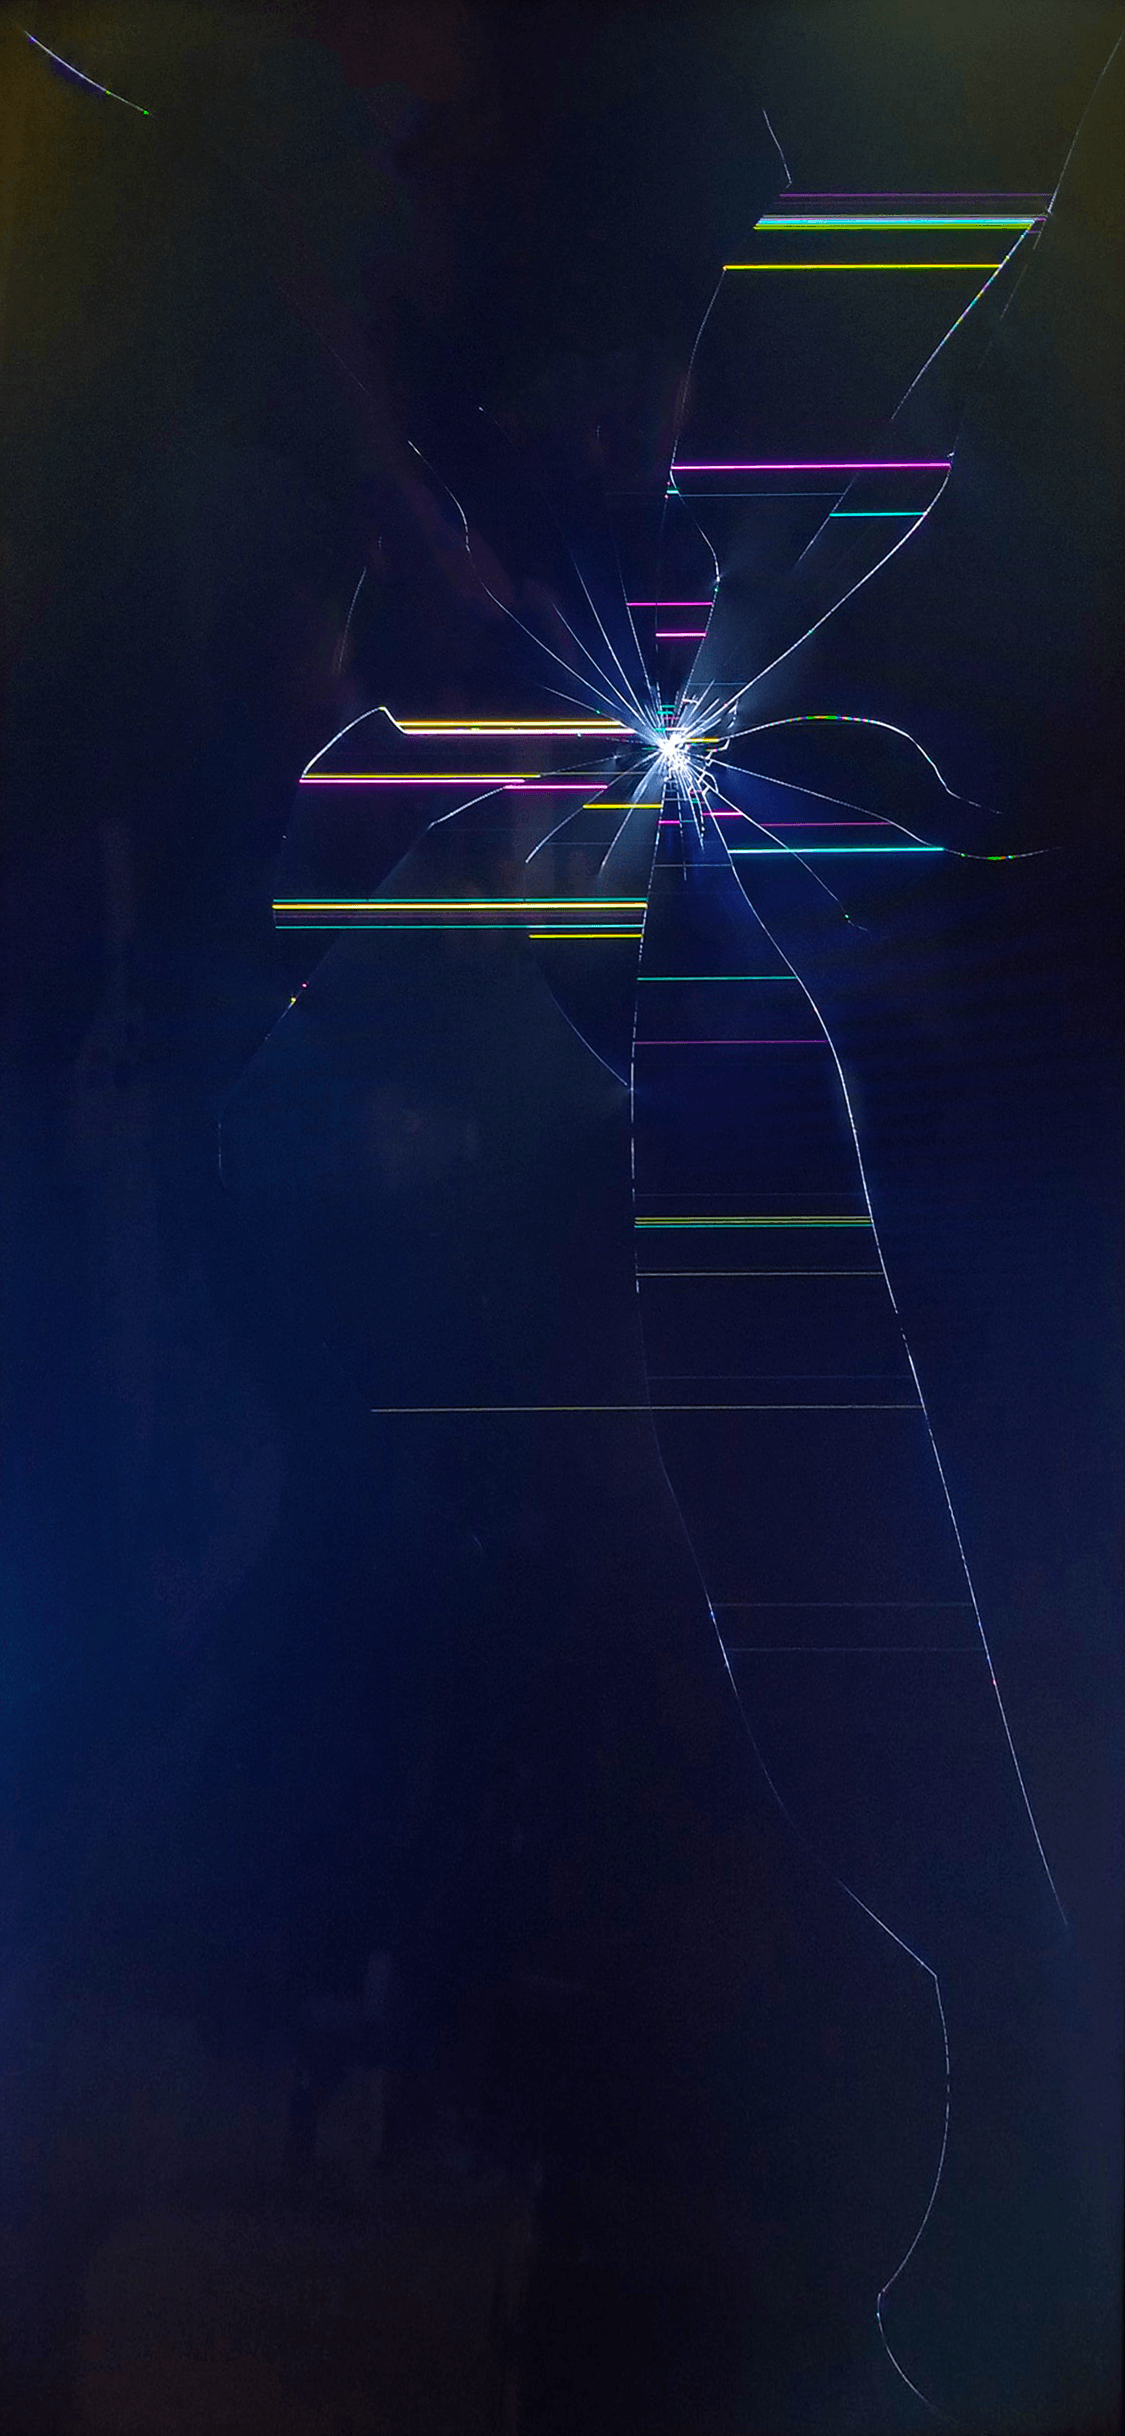 Pretend your phone's screen is cracked with this wallpaper